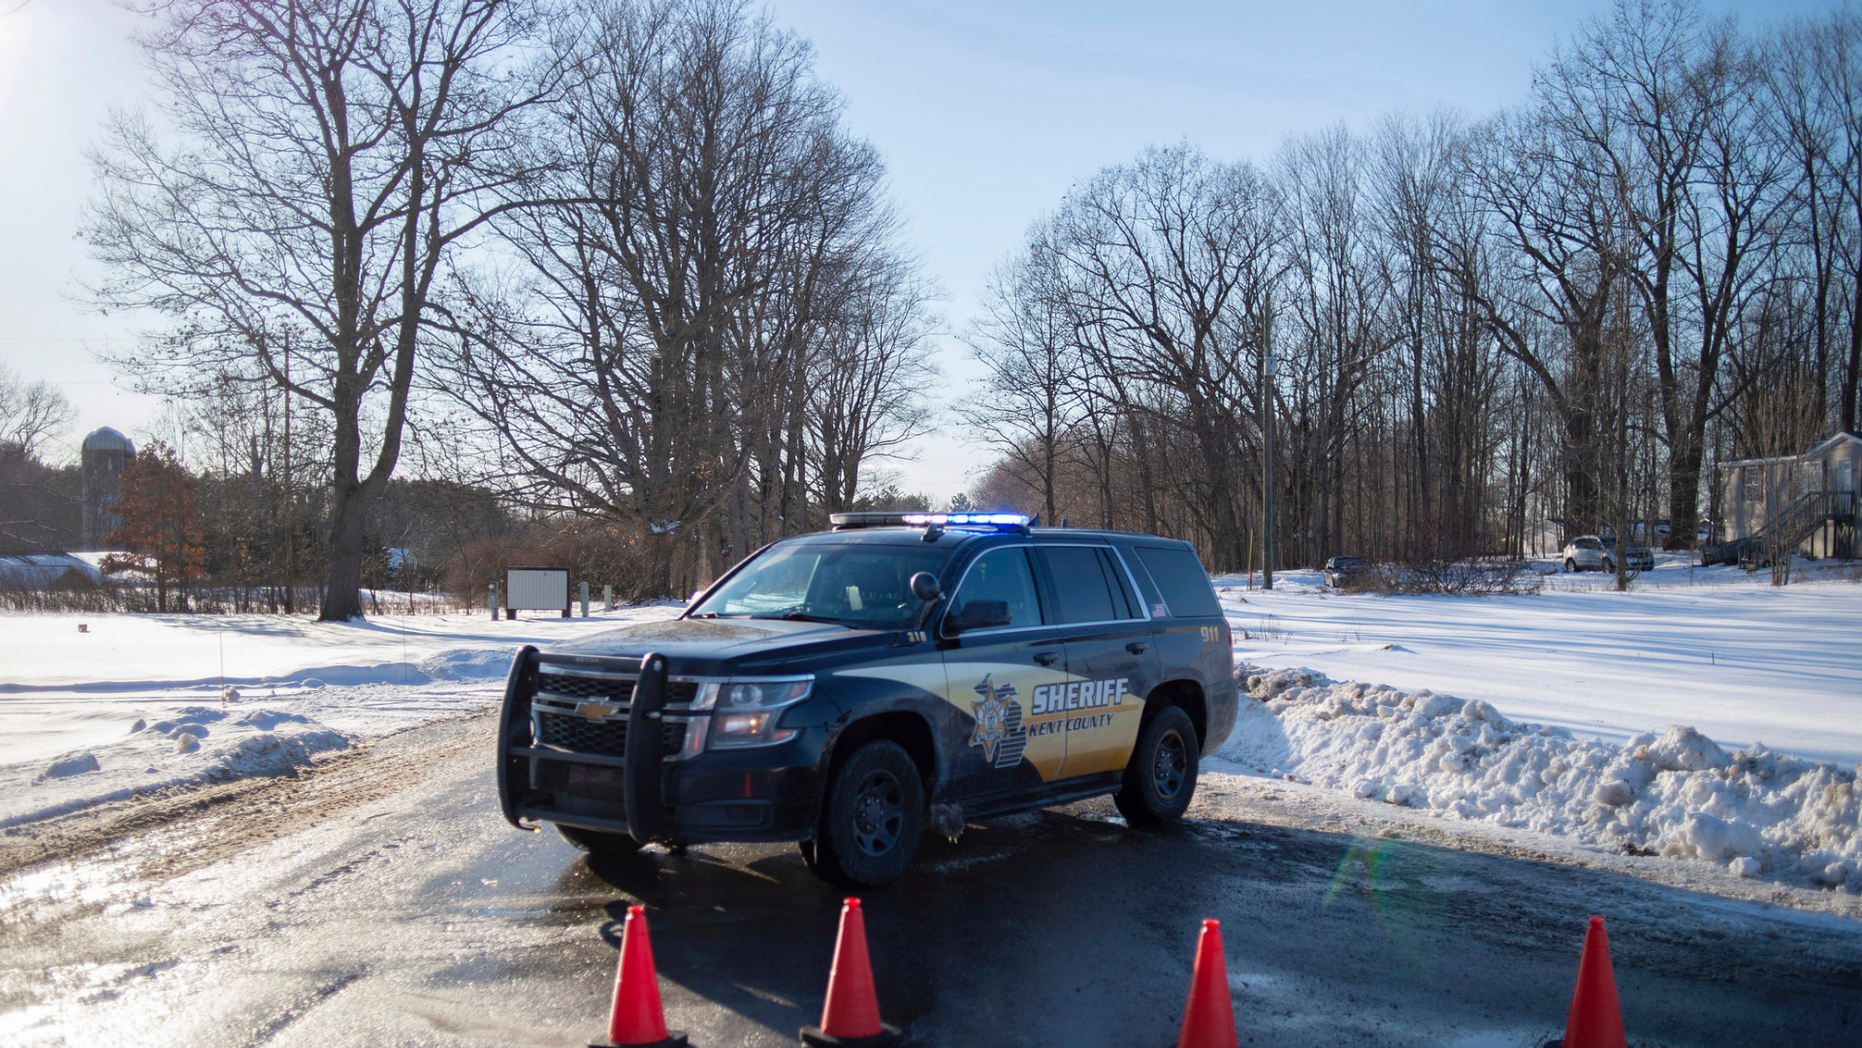 Members of the Kent County Sheriff investigate the scene of a deadly shootout at the corner of 19 Mile NE and NE Division Division on a property on Monday, February 18, 2019, near Cedar Springs, Michigan. WOOD-TV reports Kent County Sheriff Michelle LaJoye- According to Young, the authorities found the victims at a property near Cedar Springs, a community about 30 kilometers north of Grand Rapids. (Neil Blake / MLive.com / The Grand Rapids Press via AP)